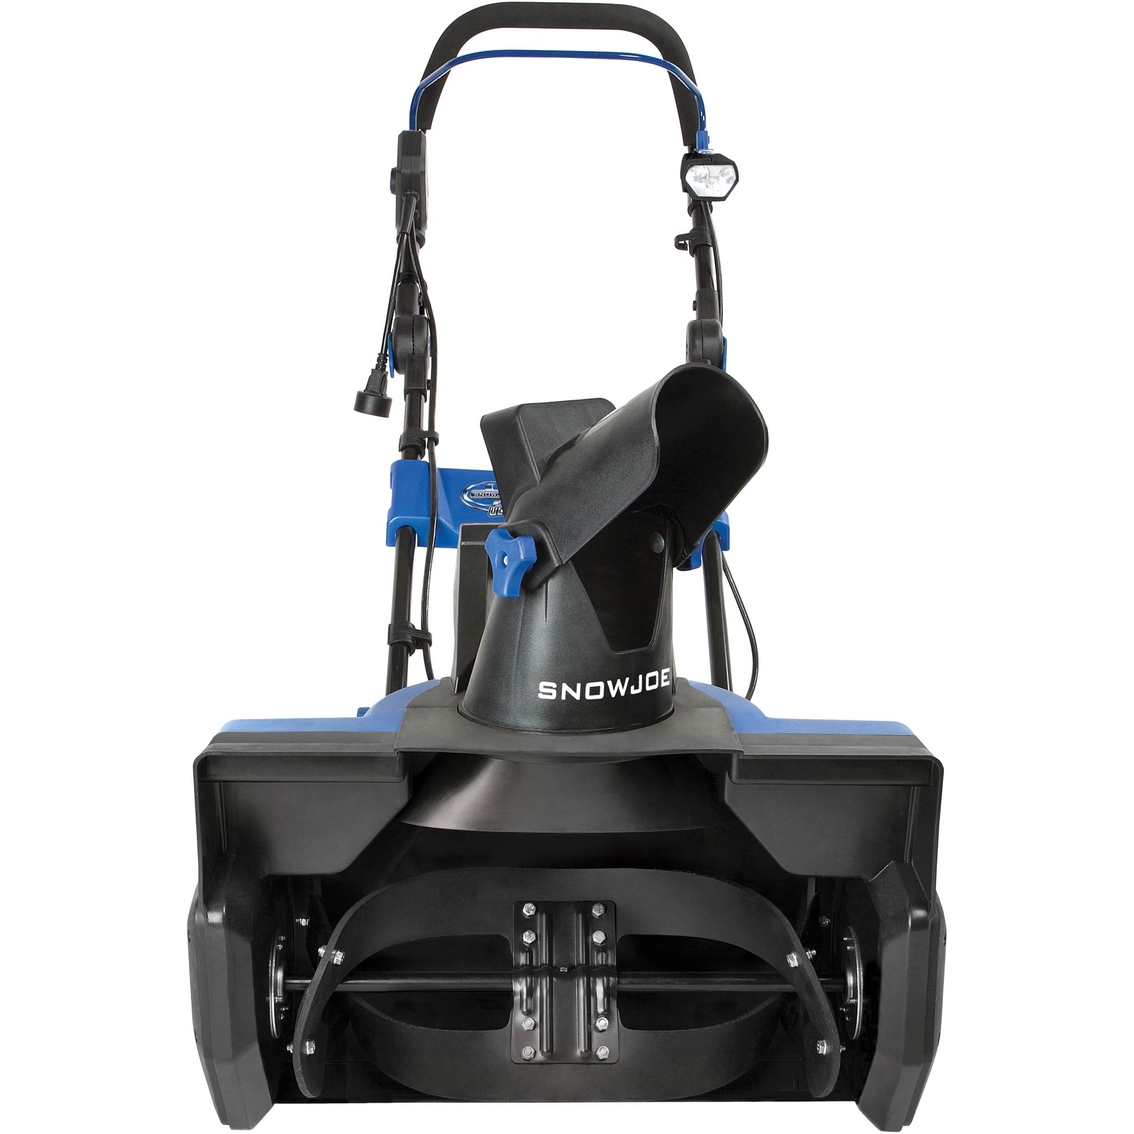 Snow Joe Ultra 21 in. 15 Amp Electric Snow Thrower - Image 2 of 4